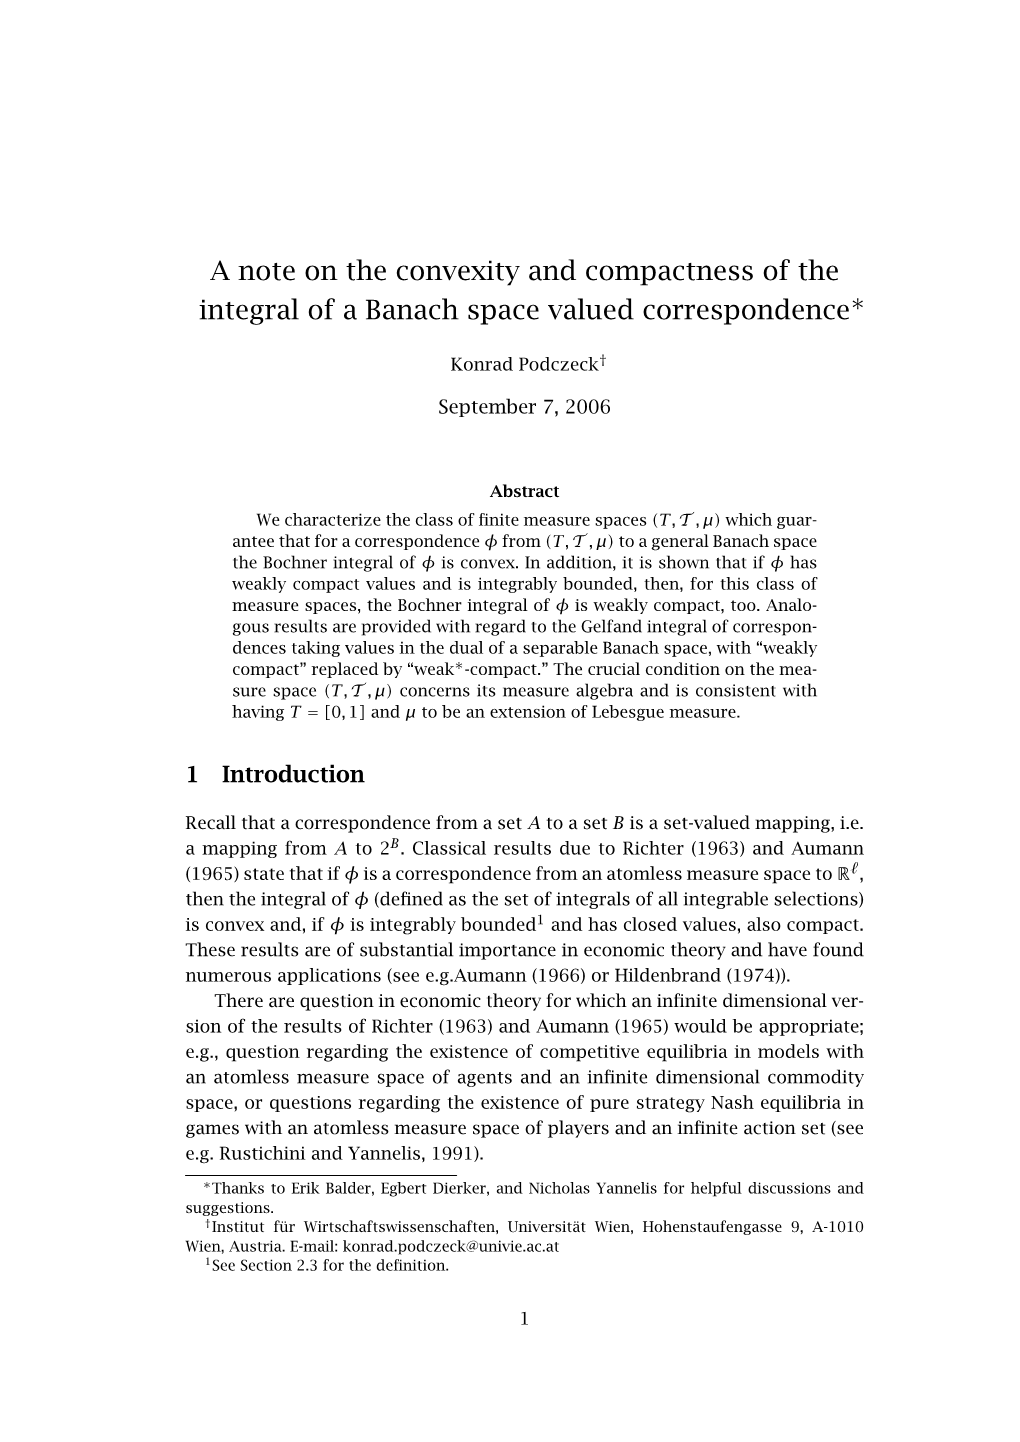 A Note on the Convexity and Compactness of the Integral of a Banach Space Valued Correspondence∗